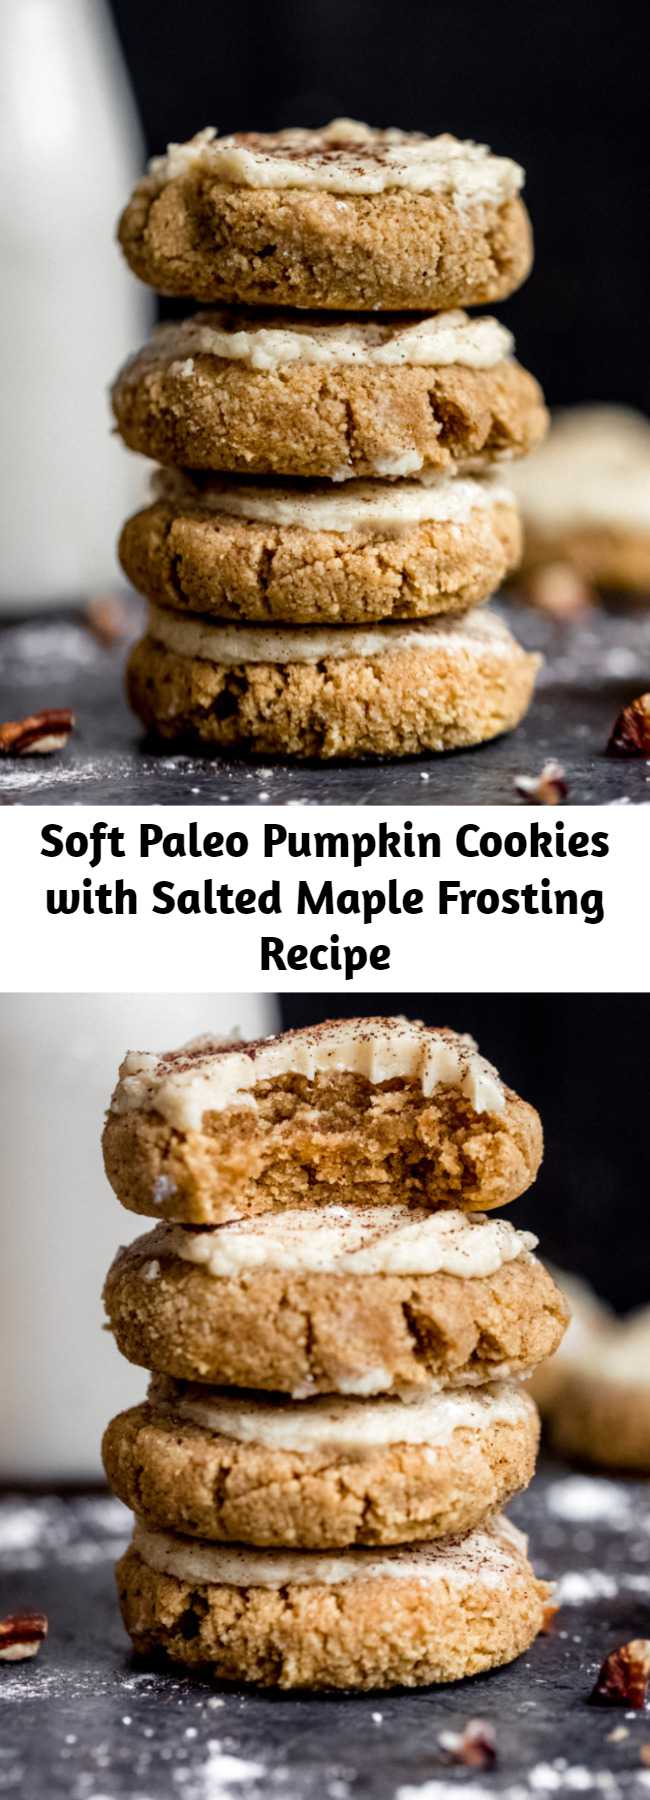 Soft Paleo Pumpkin Cookies with Salted Maple Frosting Recipe - These healthy soft pumpkin cookies with an addicting salted maple frosting are absolutely delicious! These melt-in-your-mouth cookies are both gluten free and grain free and taste like a slice of your favorite pumpkin pie! #cookies #pumpkin #pumpkinrecipe #healthydessert #glutenfree #baking #grainfree